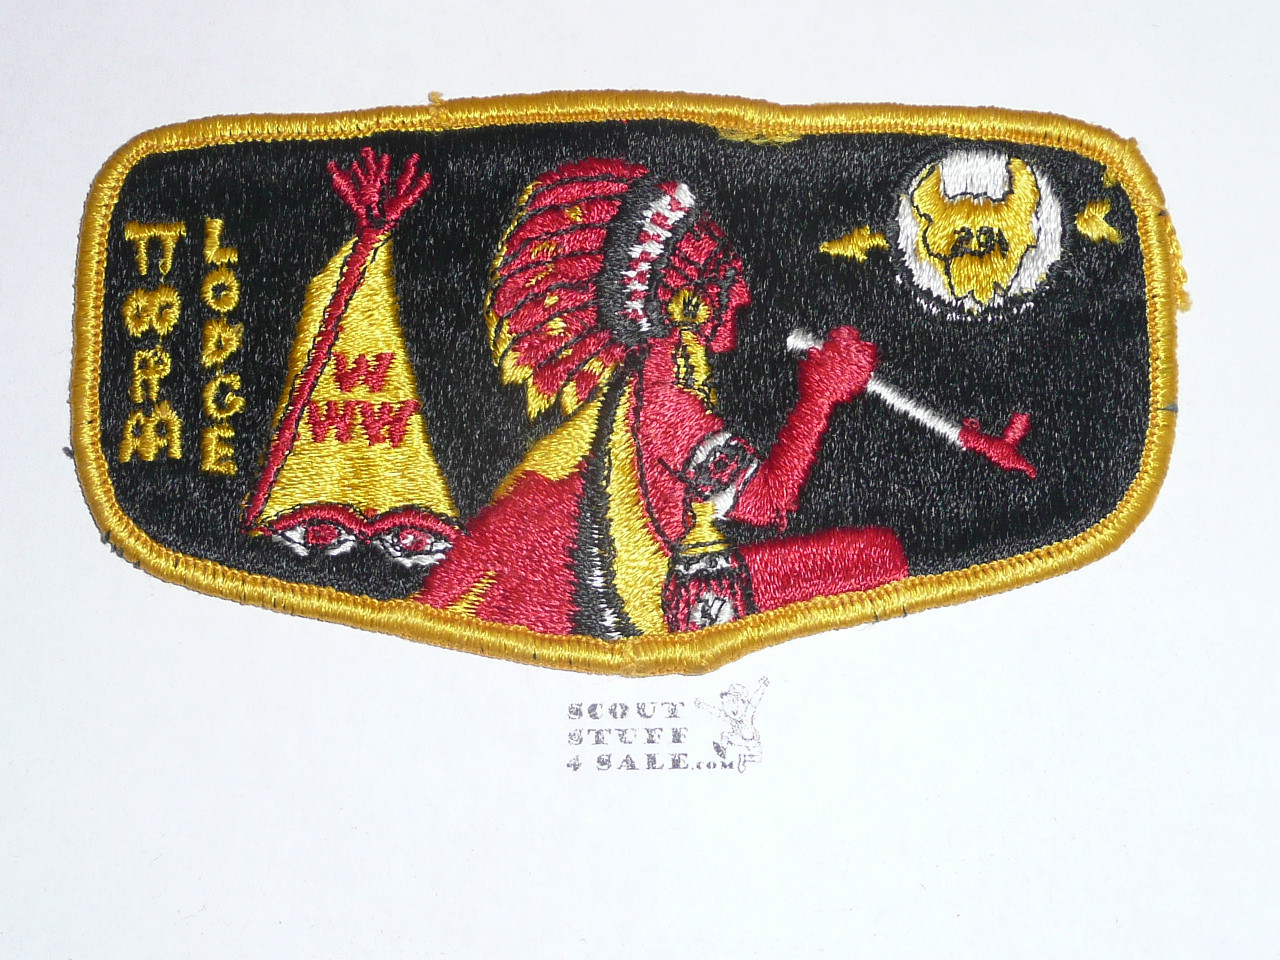 Order of the Arrow Lodge #291 Topa Topa s3a Flap Patch